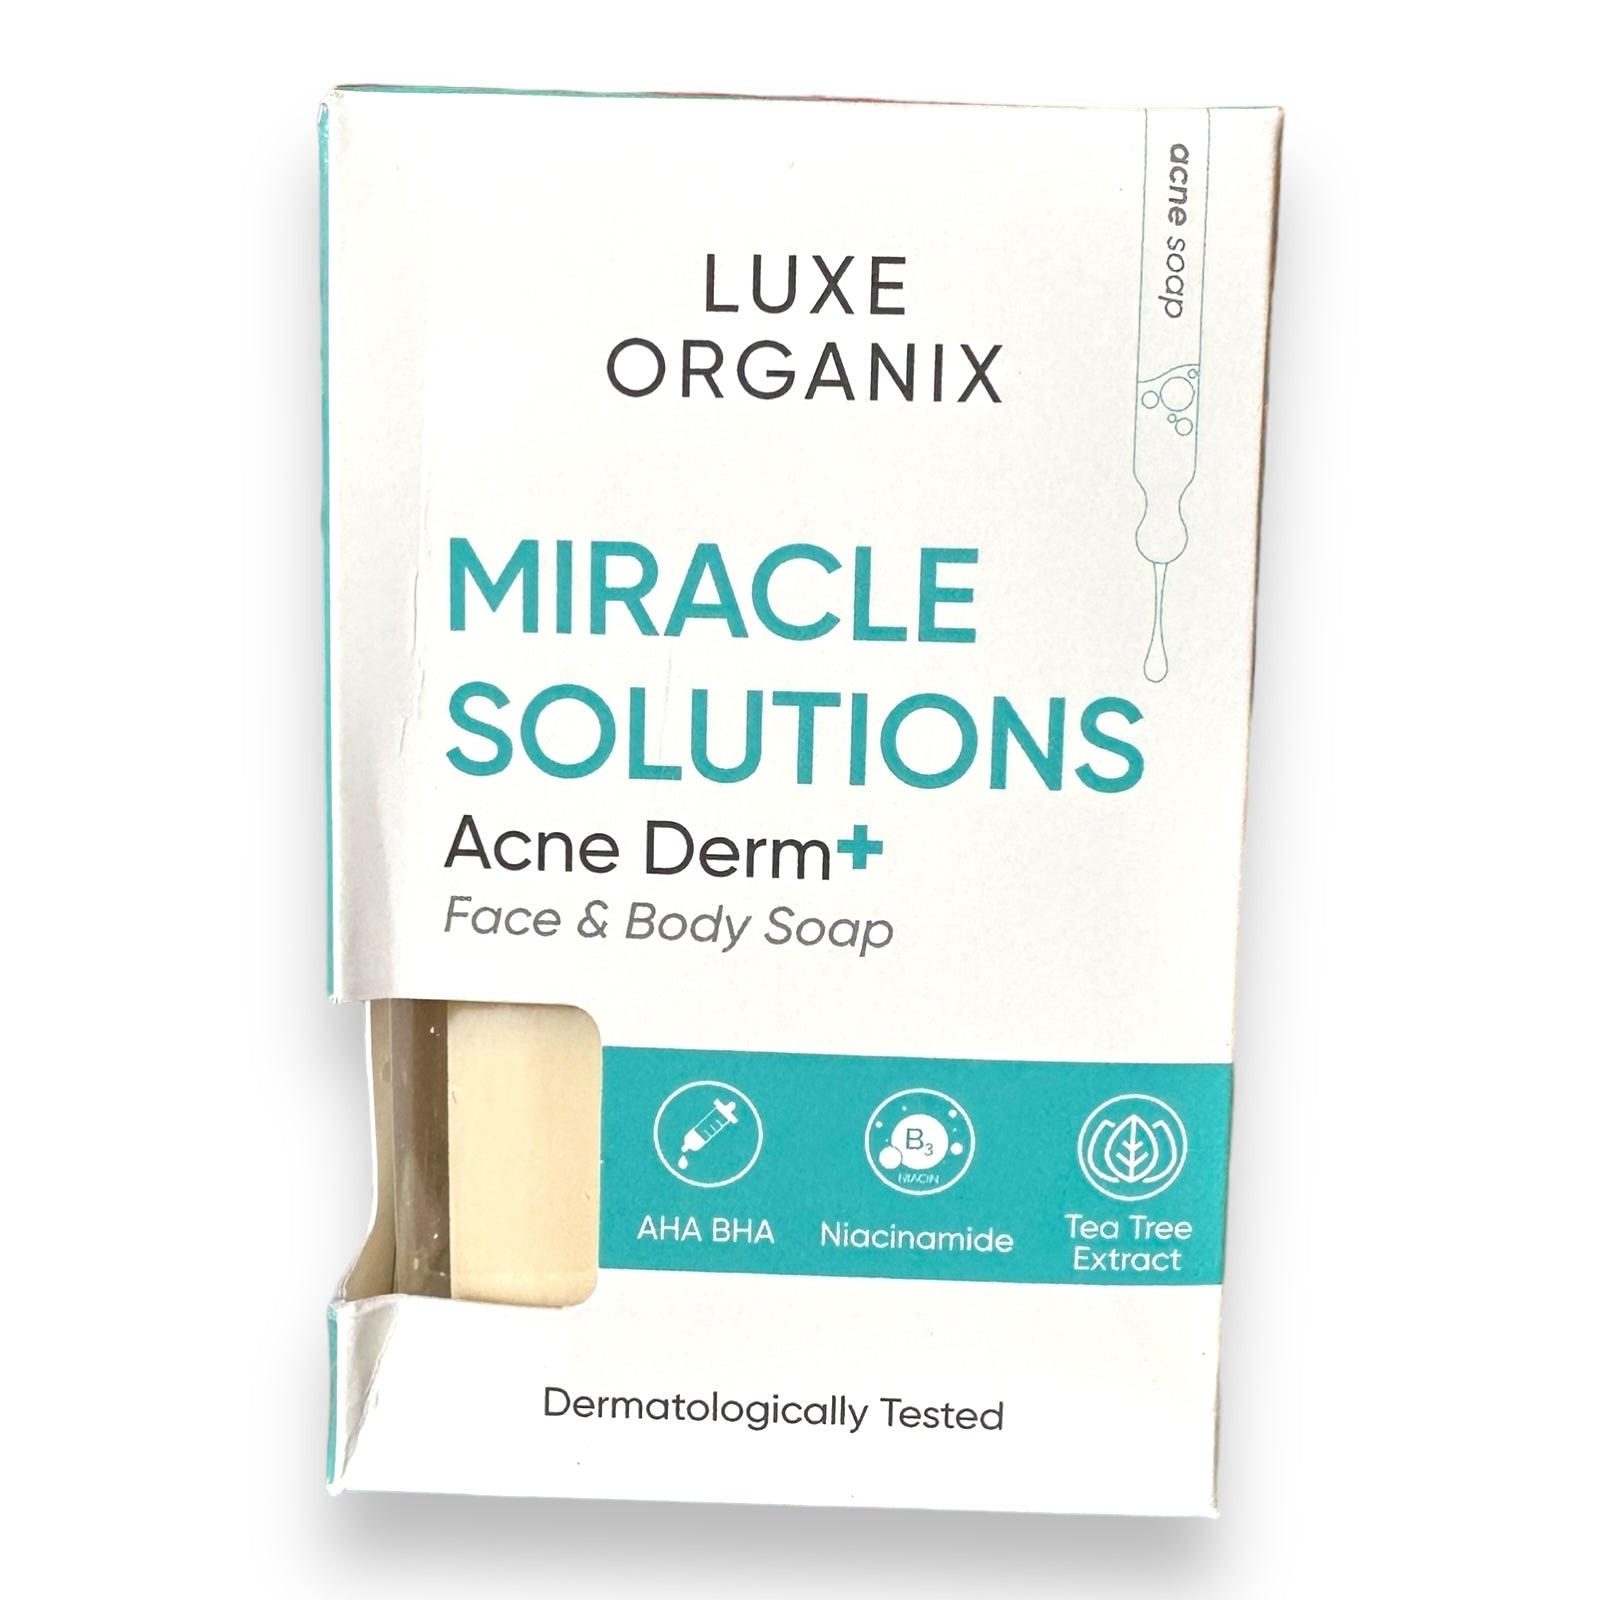 Luxe Organix - Miracle Solutions Acne Derm - Face and body Soap 135g